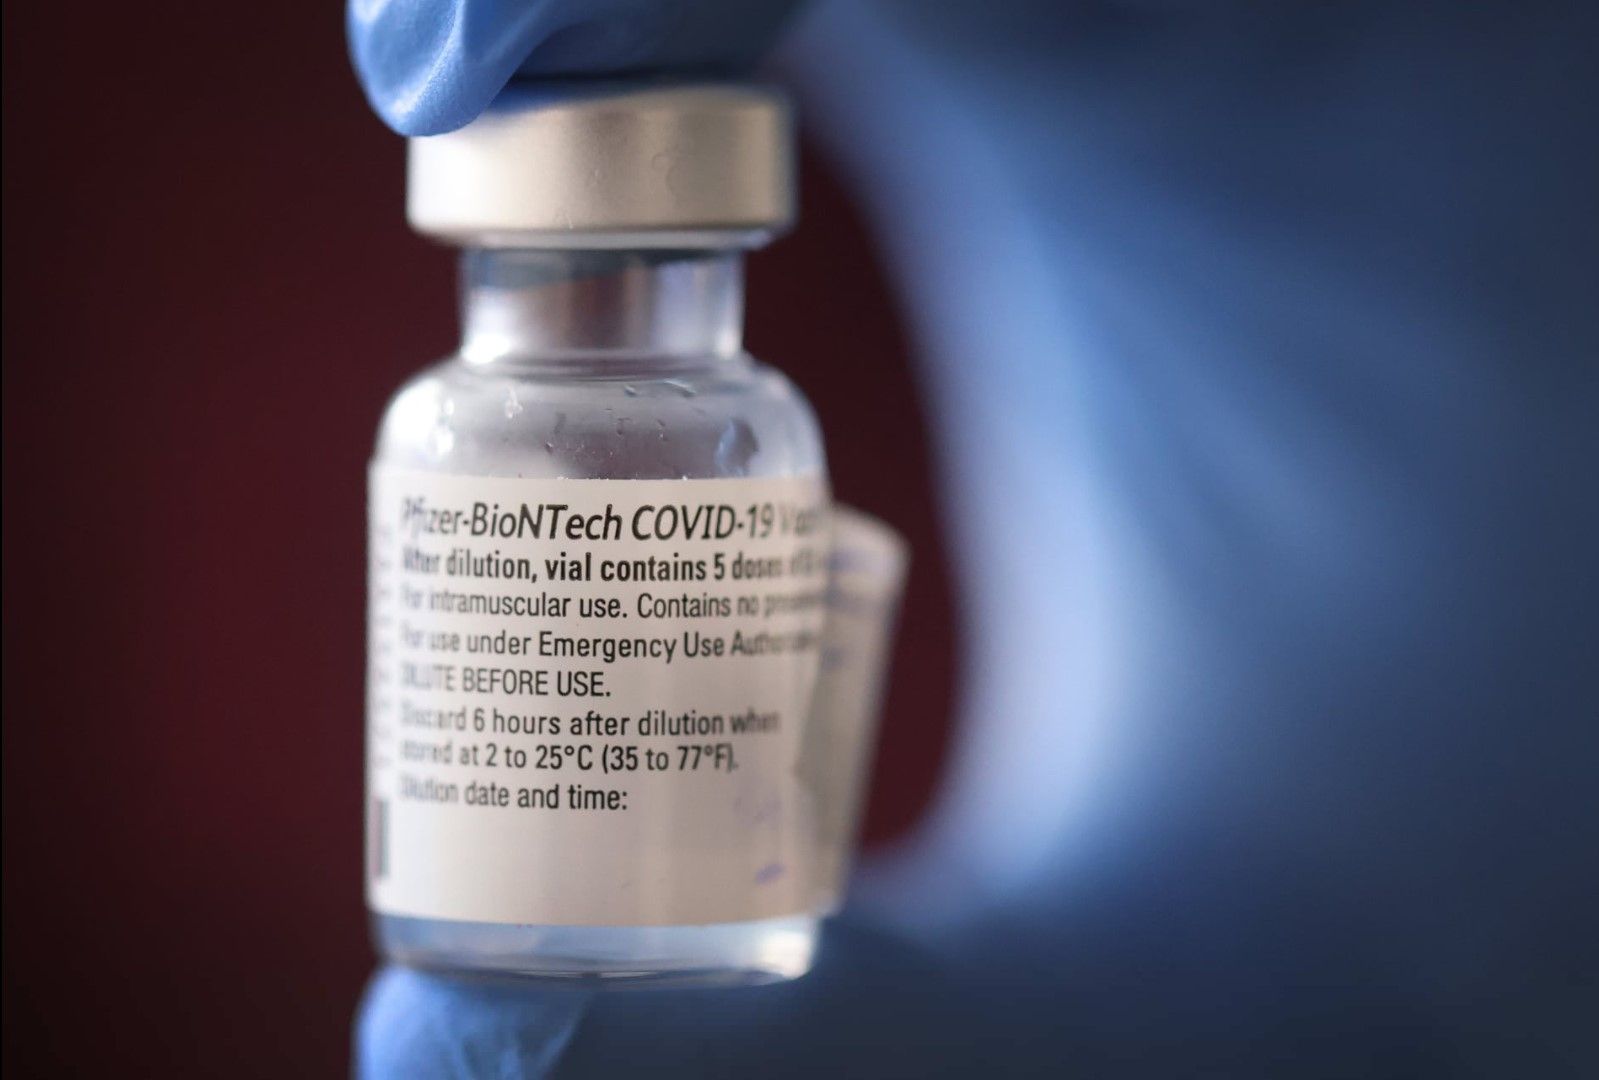 Chicago to Require COVID-19 Vaccine for City Workers